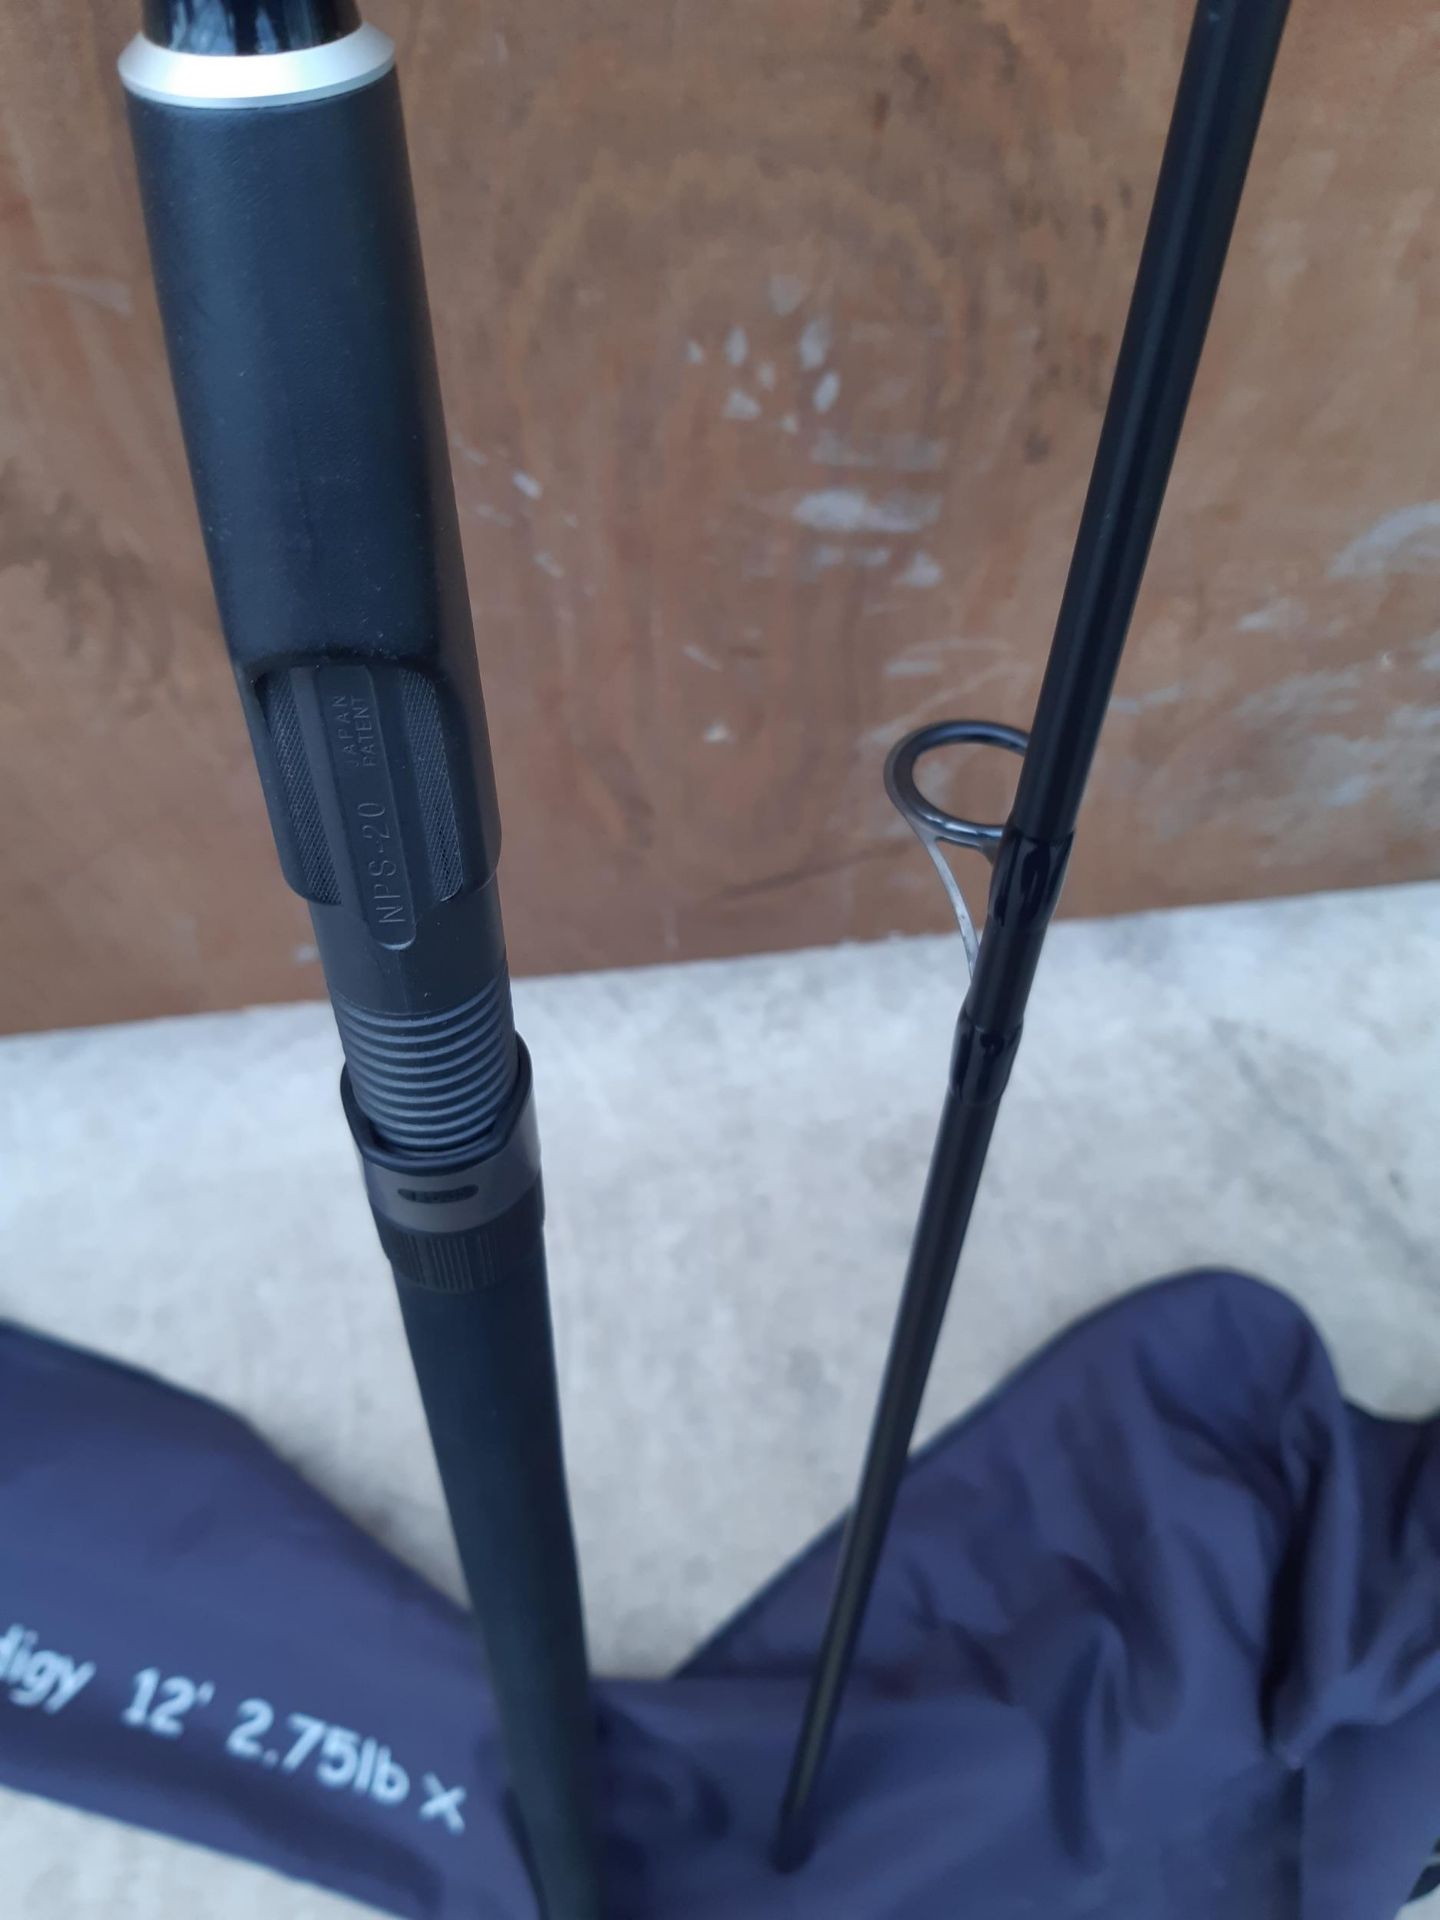 A 12FT 2.75LB GREYS PRODIGY CARP FISHING ROD. VENDOR STATES IT HAS ONLY BEEN USED TWICE - Image 7 of 8